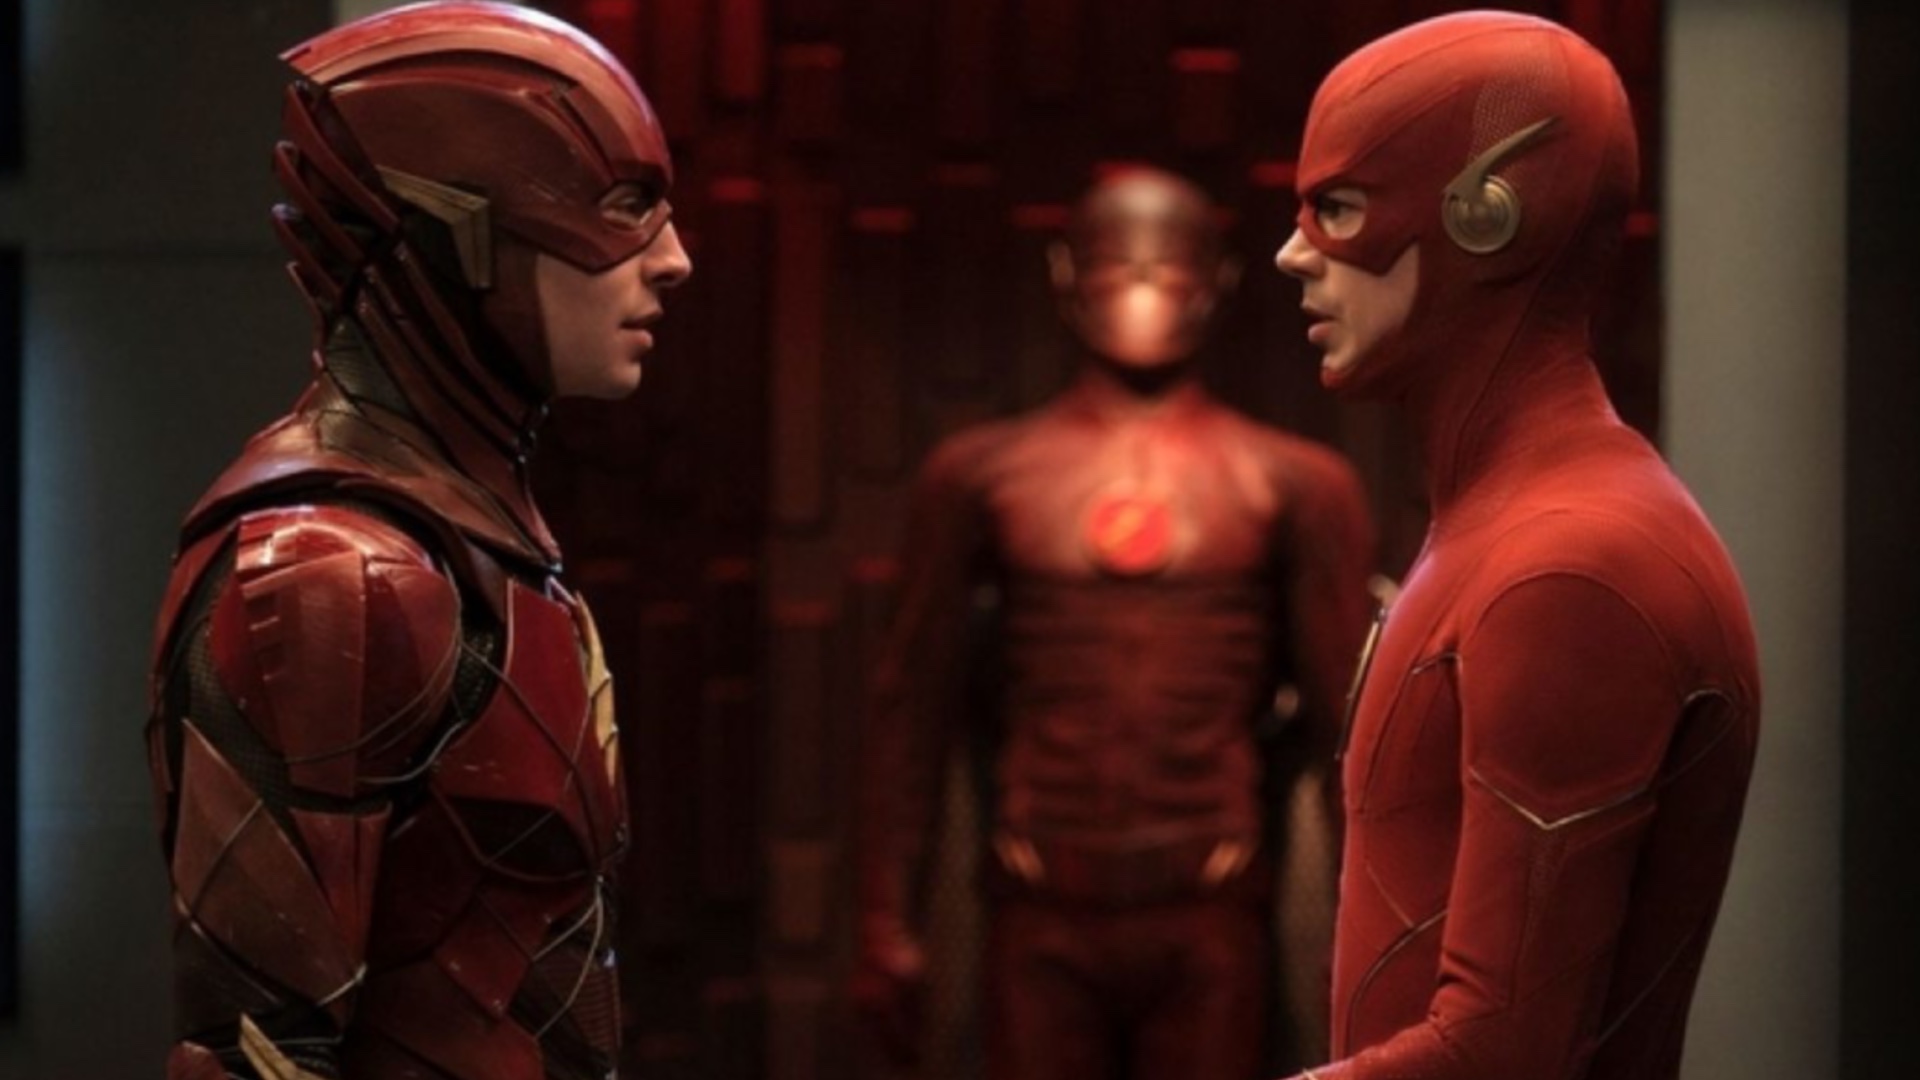 Flash from movies and TV together